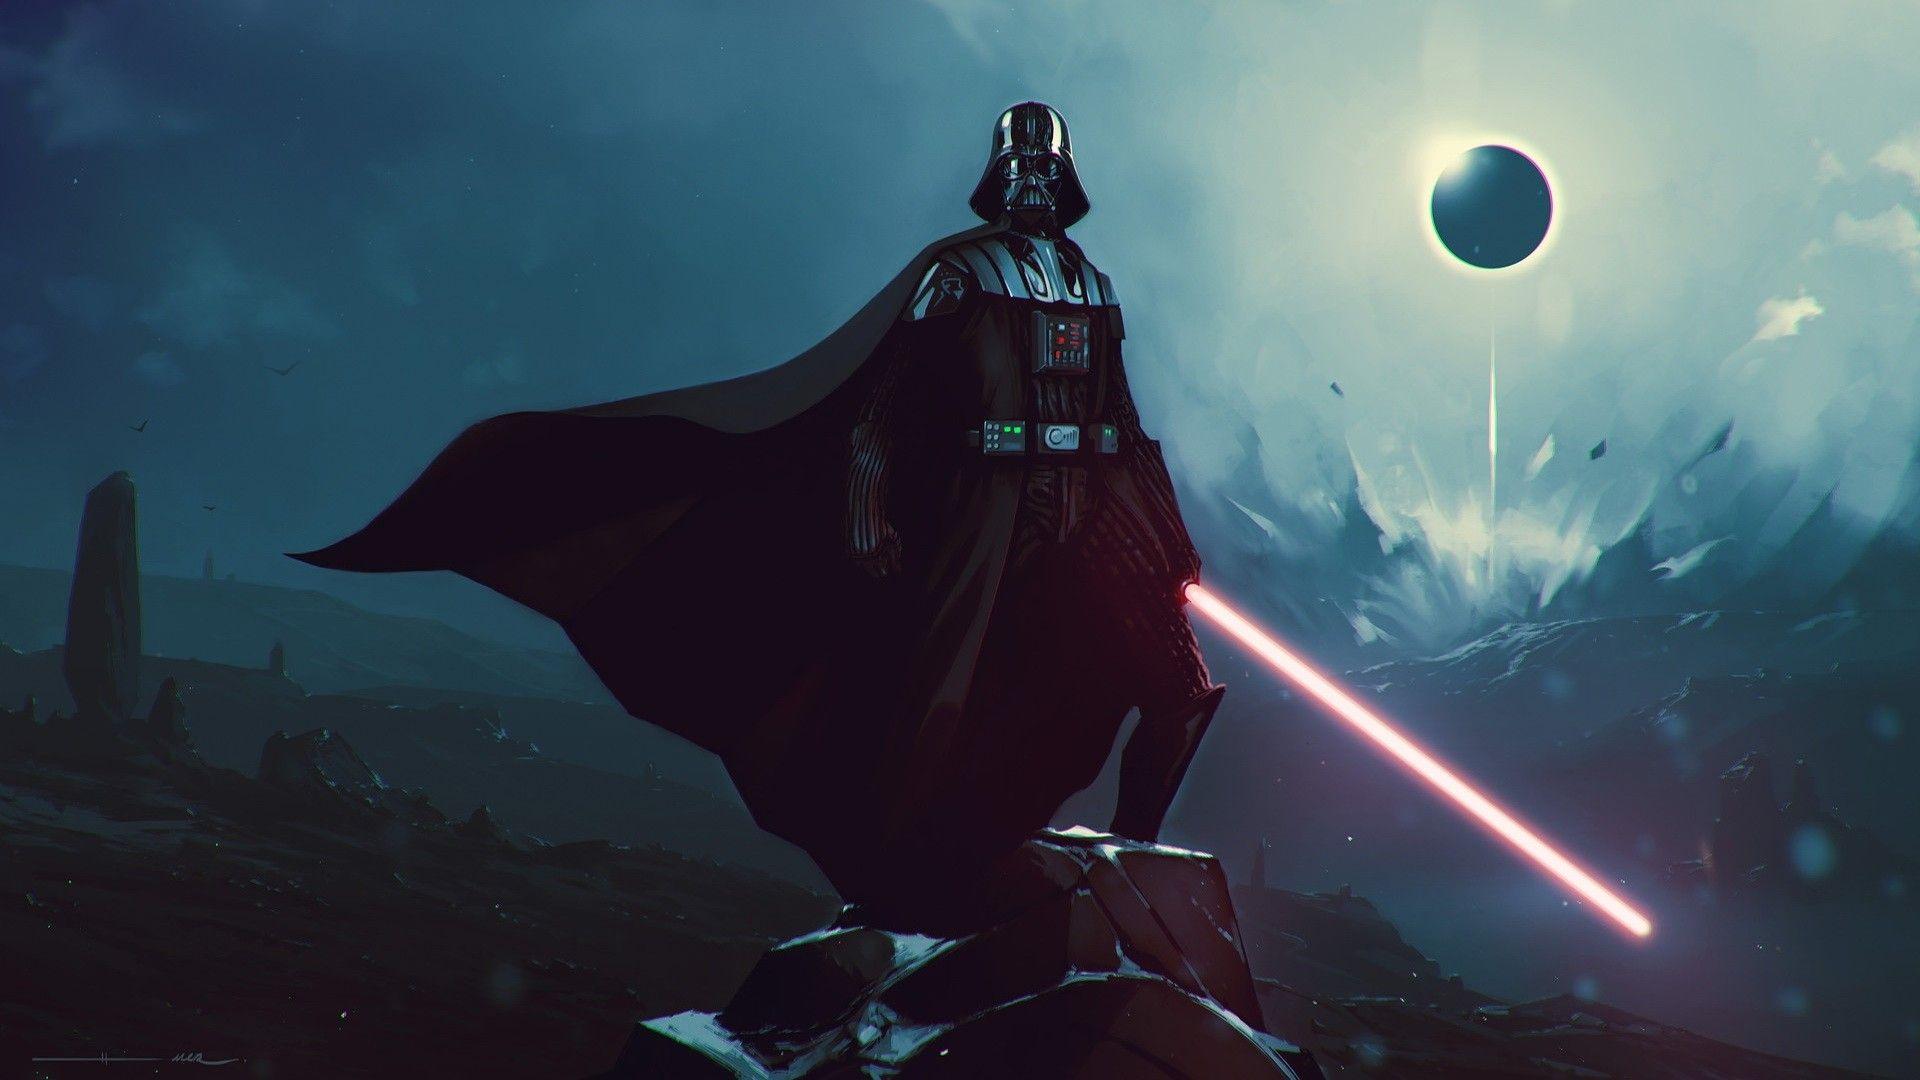 Darth Vader PC Wallpapers - Top Free Darth Vader PC Backgrounds